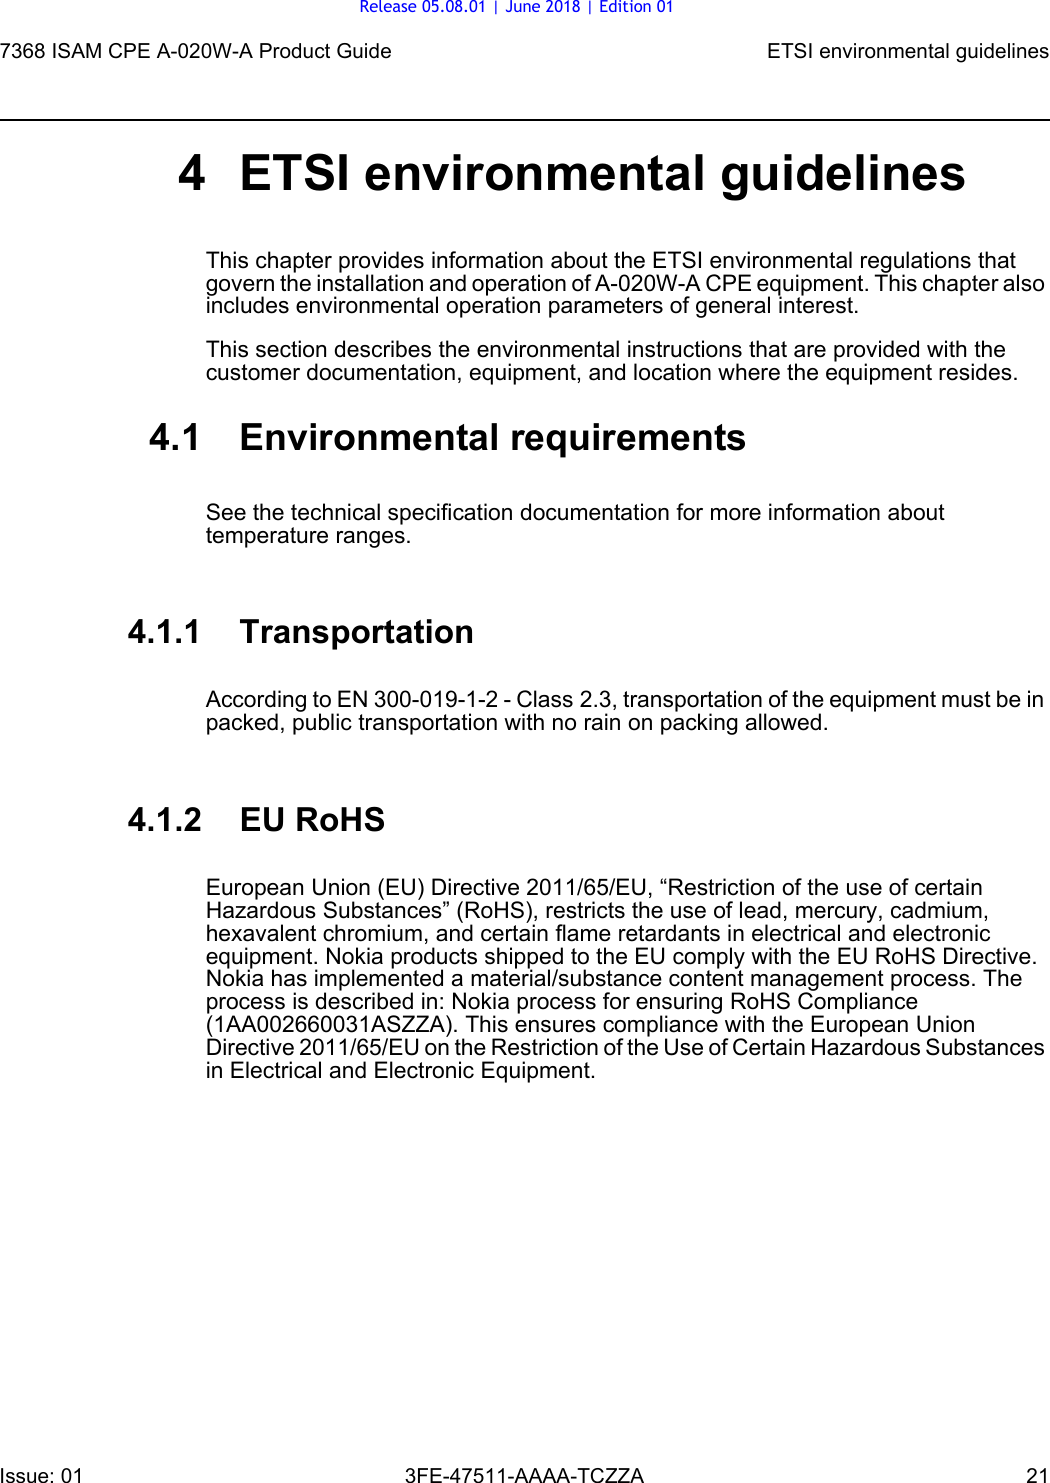 7368 ISAM CPE A-020W-A Product Guide ETSI environmental guidelinesIssue: 01 3FE-47511-AAAA-TCZZA 21 4 ETSI environmental guidelinesThis chapter provides information about the ETSI environmental regulations that govern the installation and operation of A-020W-A CPE equipment. This chapter also includes environmental operation parameters of general interest.This section describes the environmental instructions that are provided with the customer documentation, equipment, and location where the equipment resides.4.1 Environmental requirementsSee the technical specification documentation for more information about temperature ranges.4.1.1 TransportationAccording to EN 300-019-1-2 - Class 2.3, transportation of the equipment must be in packed, public transportation with no rain on packing allowed.4.1.2 EU RoHSEuropean Union (EU) Directive 2011/65/EU, “Restriction of the use of certain Hazardous Substances” (RoHS), restricts the use of lead, mercury, cadmium, hexavalent chromium, and certain flame retardants in electrical and electronic equipment. Nokia products shipped to the EU comply with the EU RoHS Directive. Nokia has implemented a material/substance content management process. The process is described in: Nokia process for ensuring RoHS Compliance (1AA002660031ASZZA). This ensures compliance with the European Union Directive 2011/65/EU on the Restriction of the Use of Certain Hazardous Substances in Electrical and Electronic Equipment.Release 05.08.01 | June 2018 | Edition 01